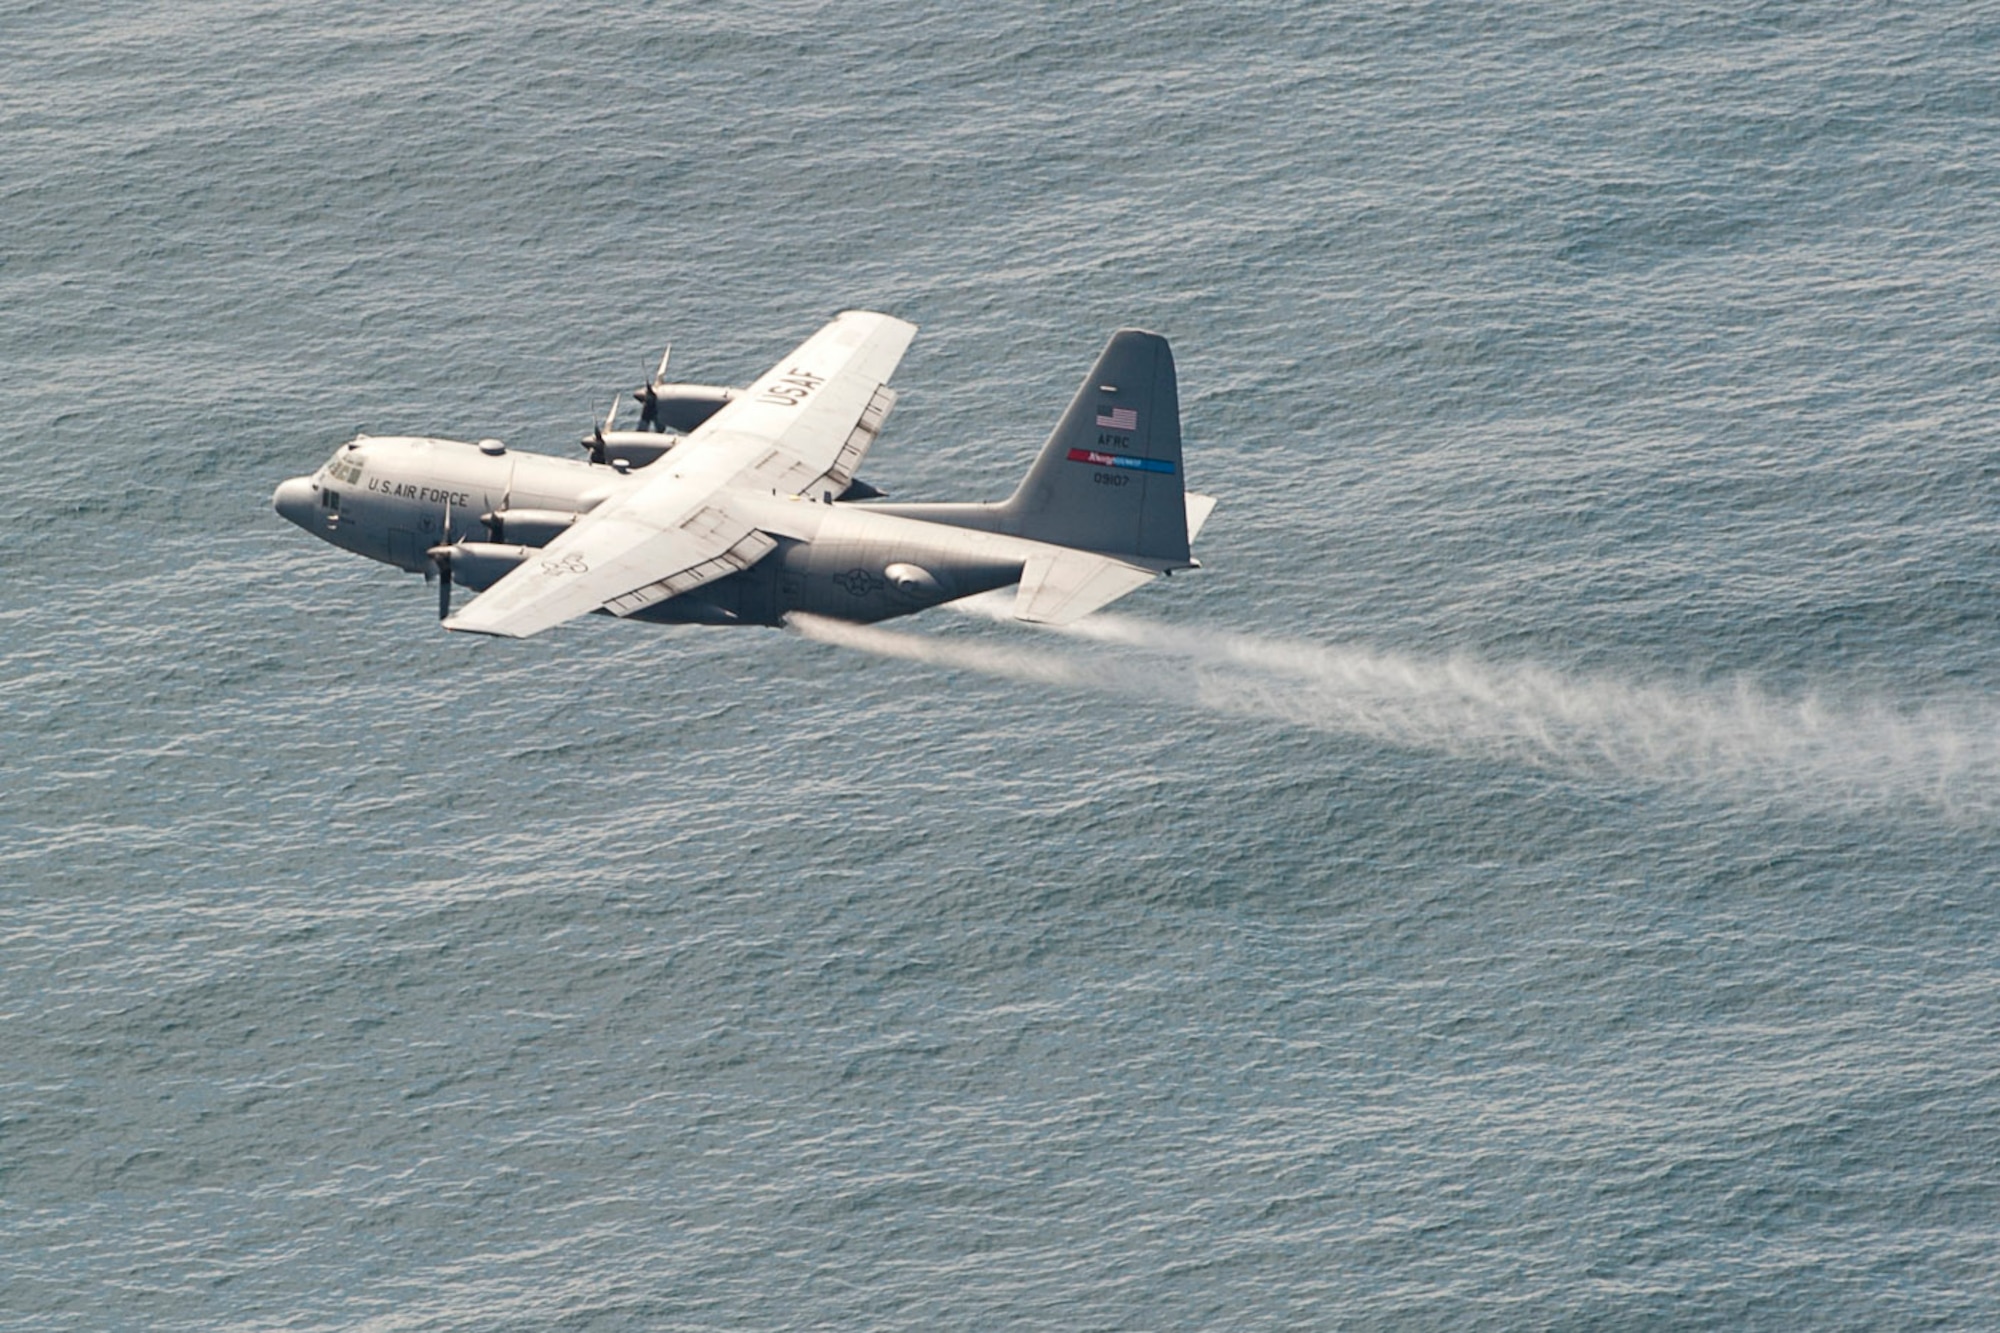 SOMEWHERE OFF THE CALIFORNIA COAST -- The Air Force Reserve's 910th Airlift Wing, the U.S. Coast Guard  and more than 35 other organizations are participating in a multi-agency oil spill response exercise near the San Diego coast, May 11-12, 2011.  A specially-equipped 910th C-130H Hercules cargo aircraft sprays a practice dispersant, actually water, onto the simulated oil spill as part of the response here, May 12, 2011.The 910th AW operates the Department of Defense's only large-area, fixed wing aerial spray capability. The 910th's C-130 aircrew is highly trained to complete this unique low-altitude, high-speed mission. Participants in the exercise returned to their various home stations on May 13, 2011. U.S. Air Force photo by Mr. Eric White